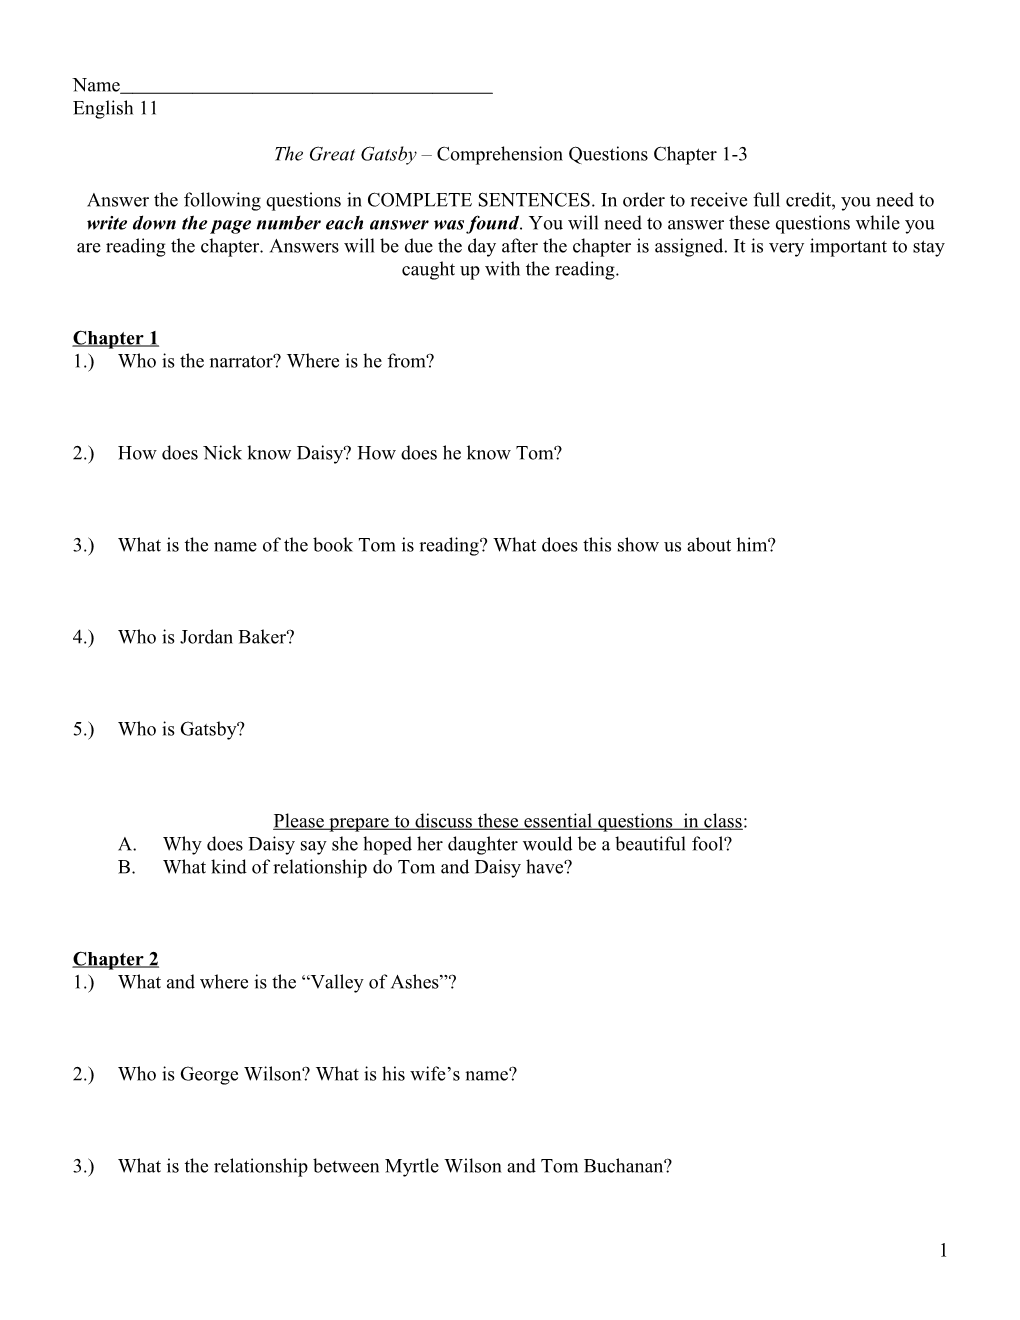 The Great Gatsby Comprehension Questions Chapter 1-3